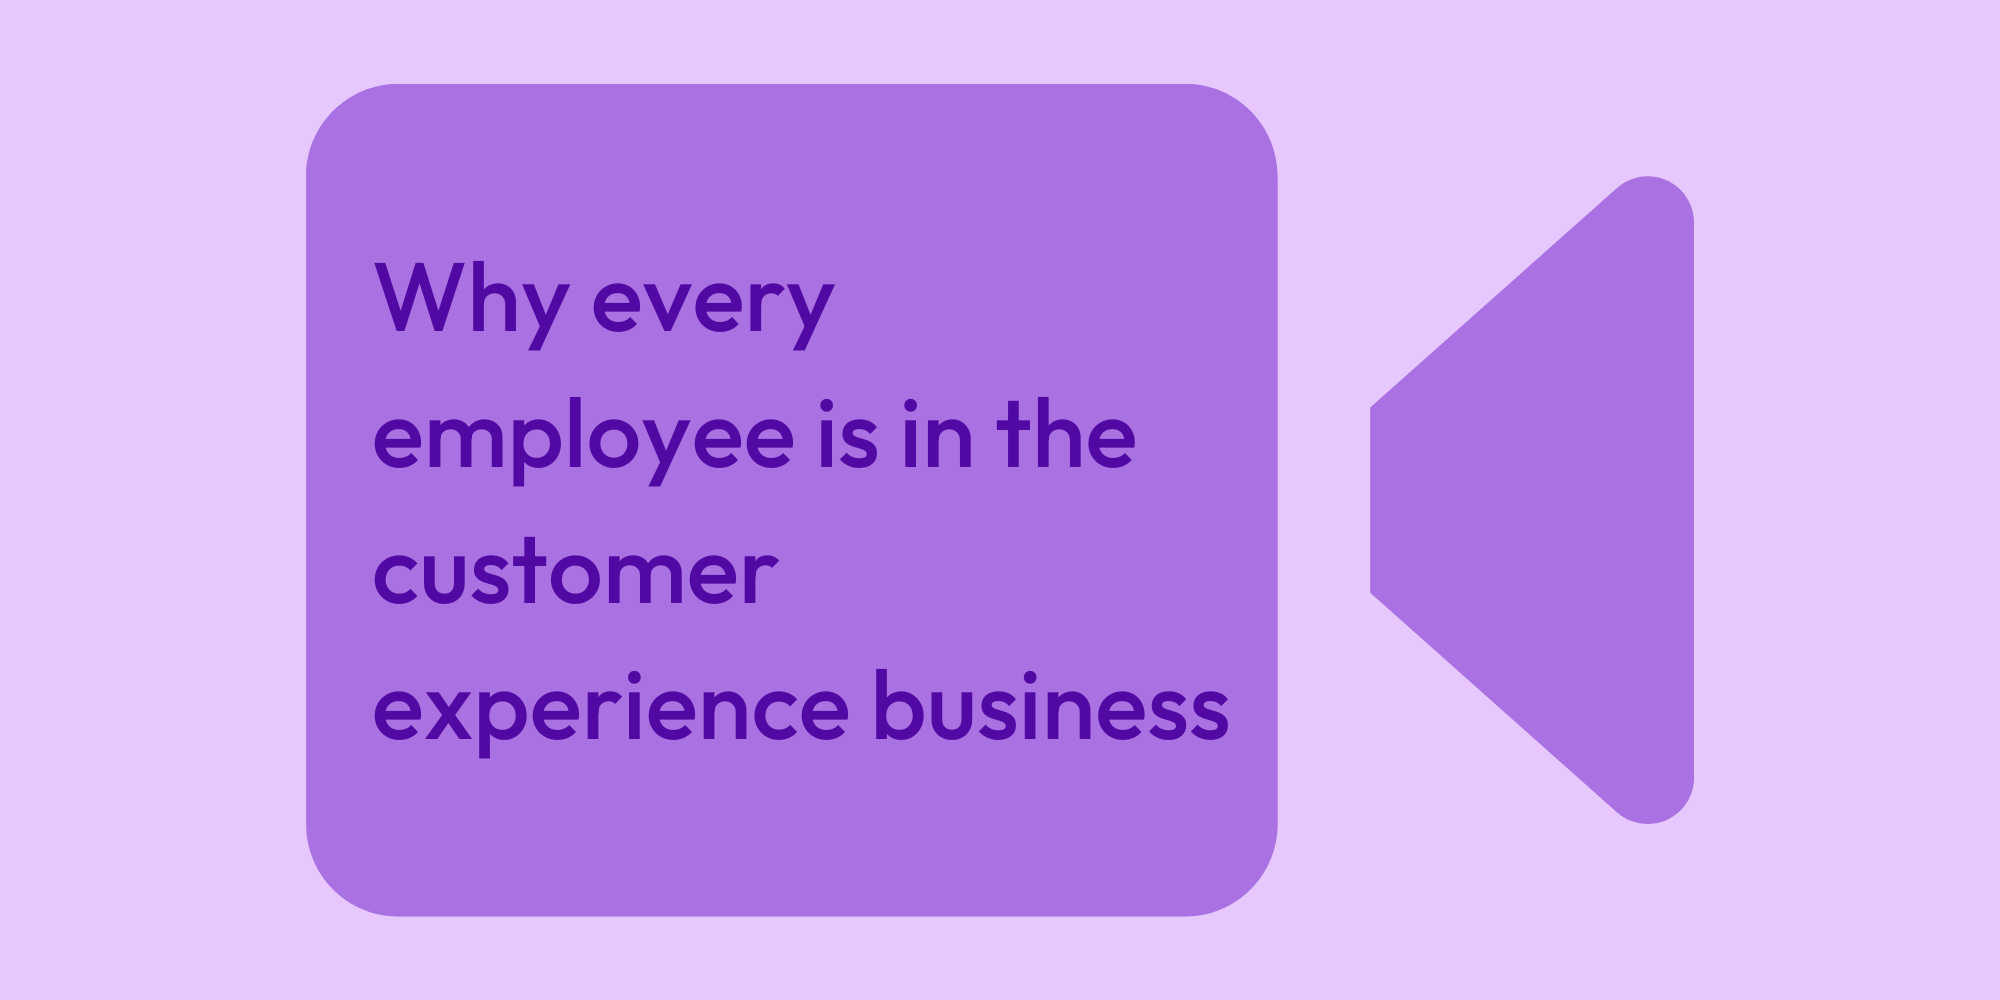 Why every employee is in the customer experience business